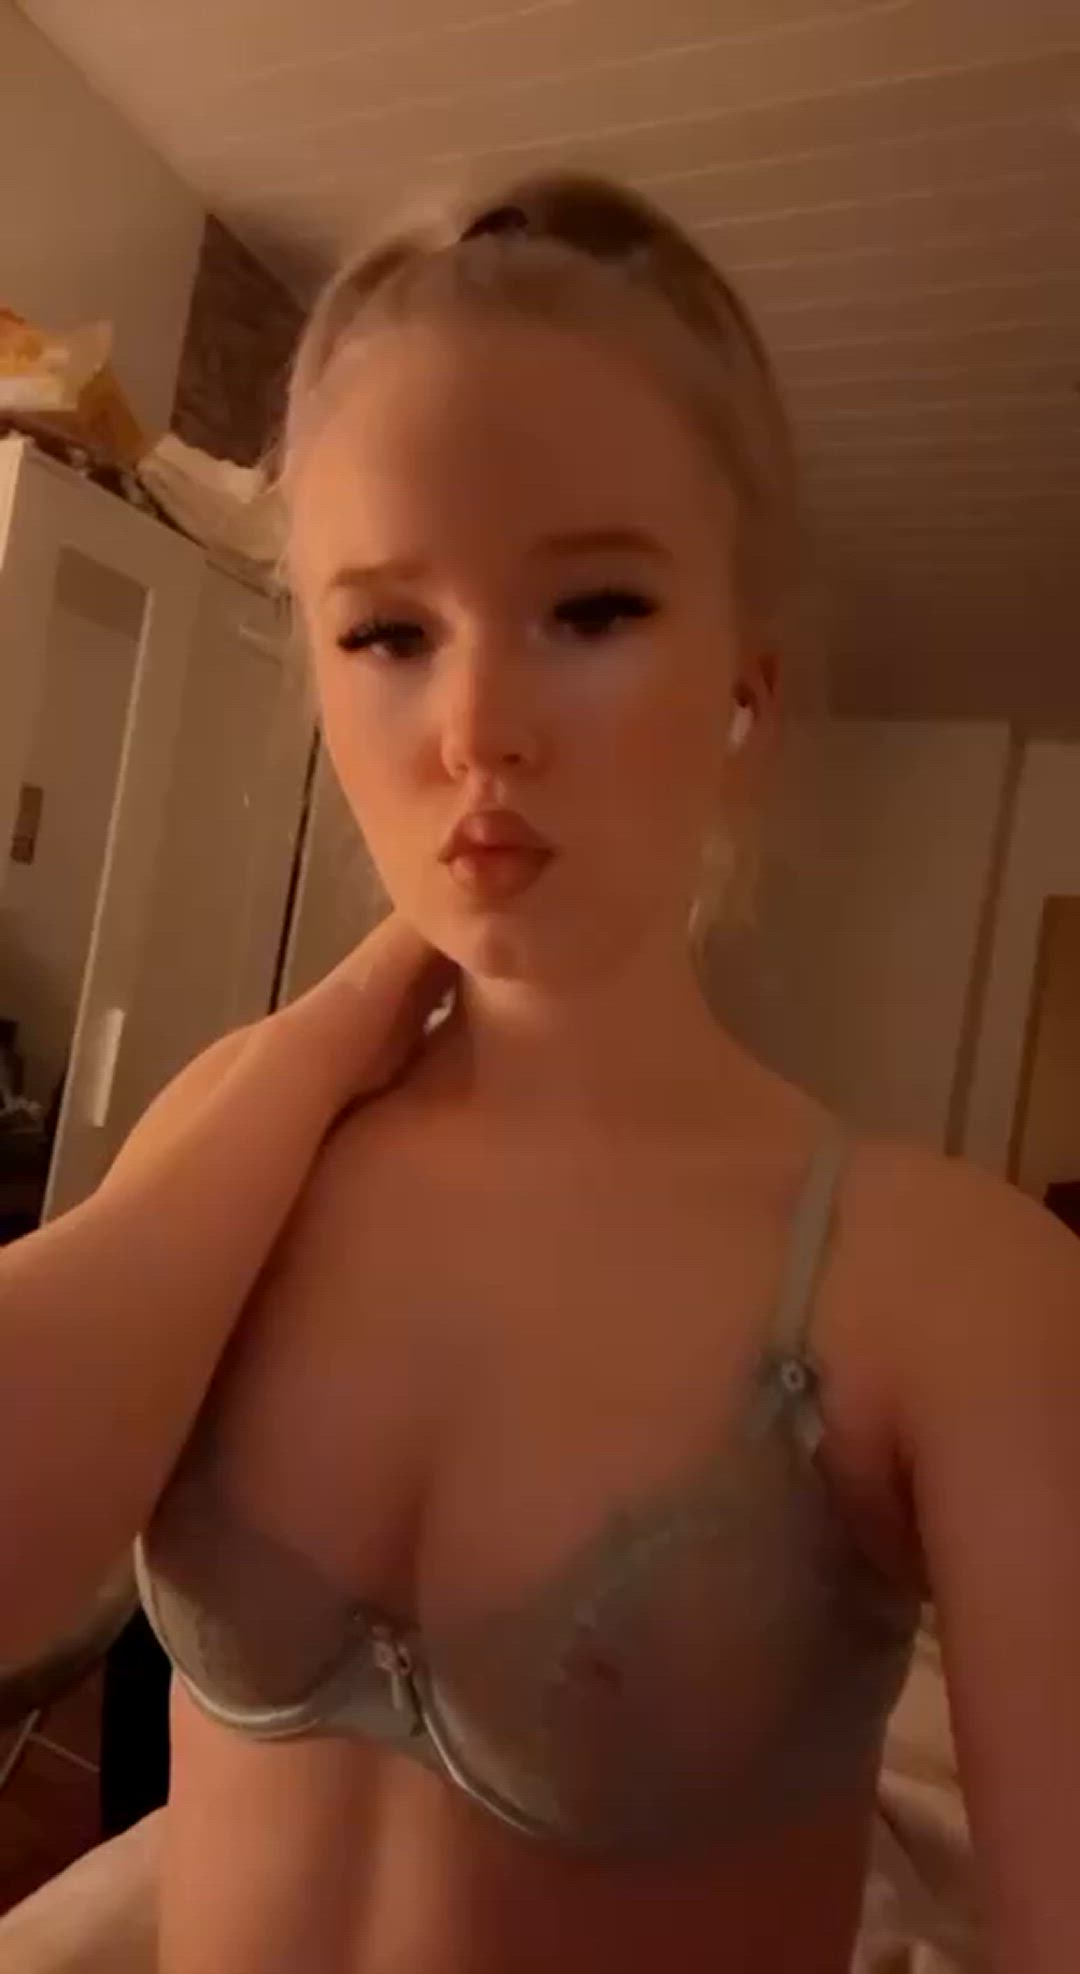 Ass porn video with onlyfans model josiebaby <strong>@josibxbyy</strong>